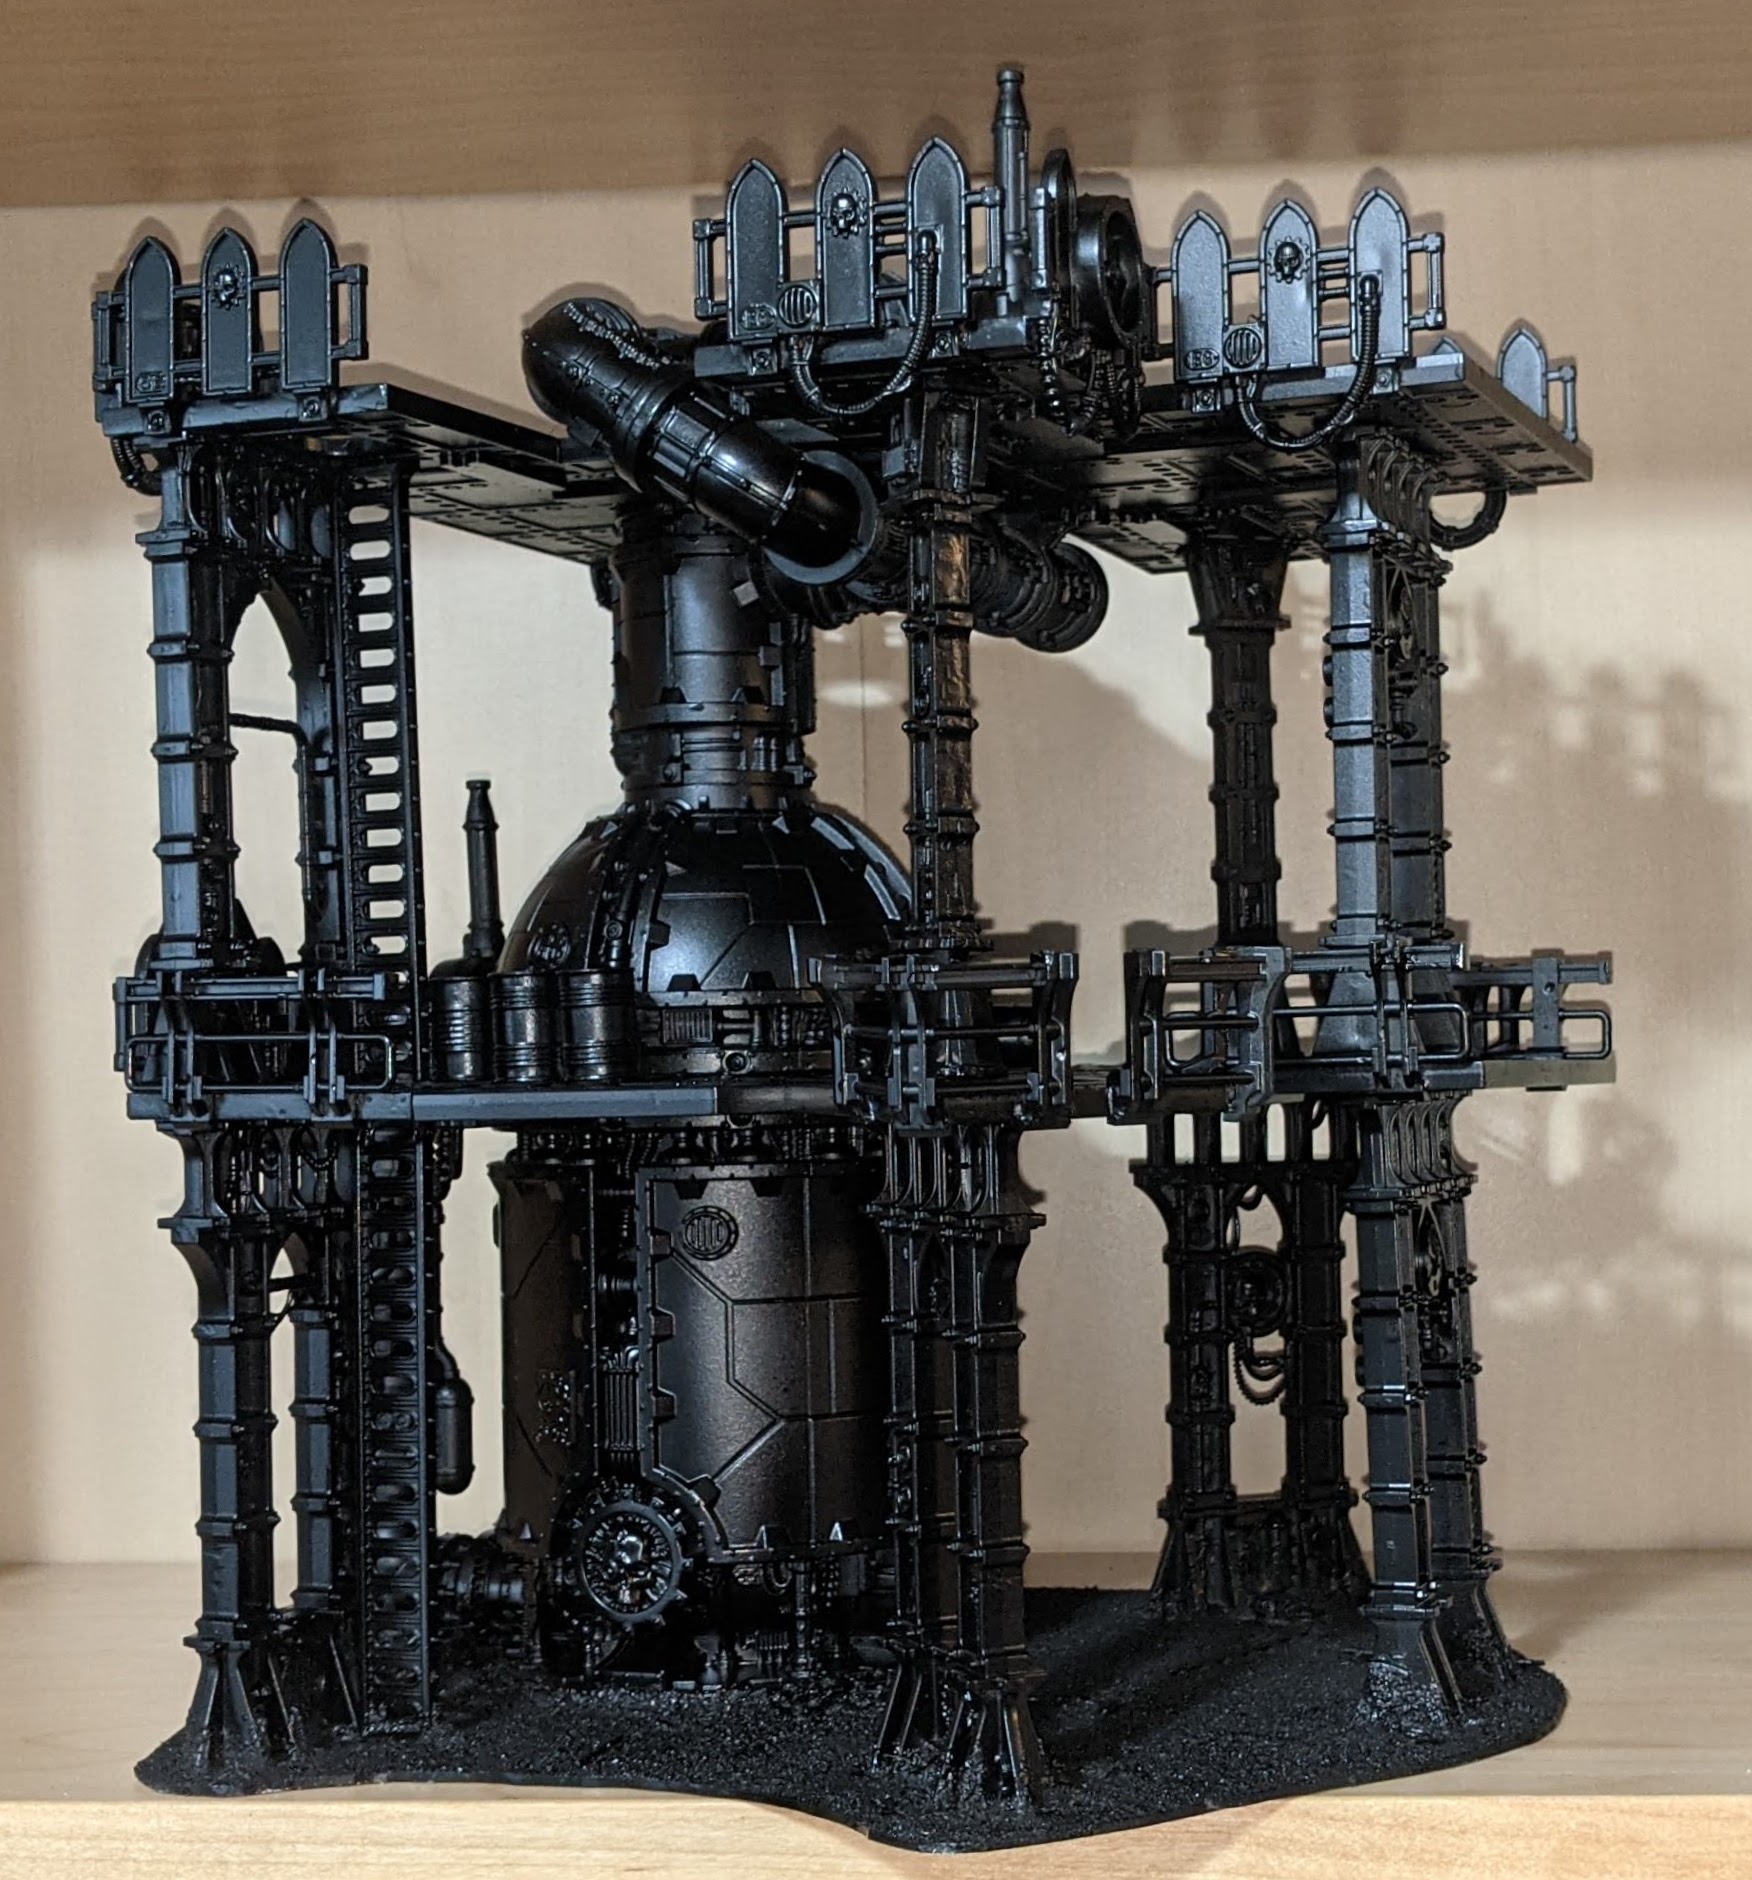 Goatboy's Warhammer 40K: Hobby Wishes and Nuln Oil Dreams! - Bell